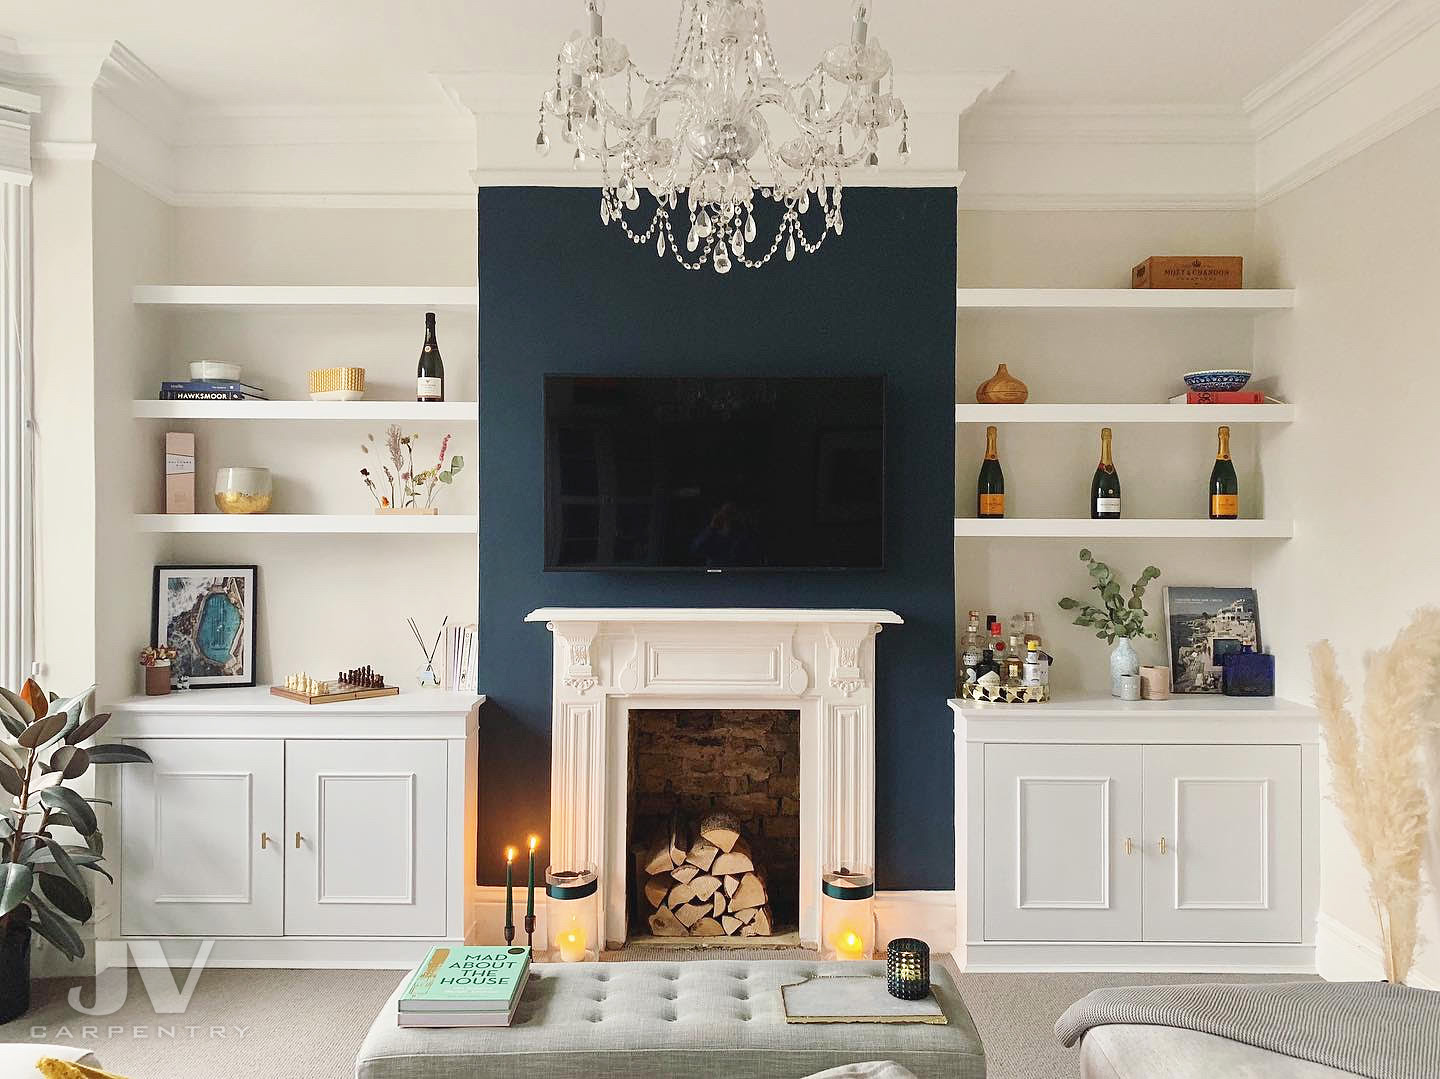 23 Alcove Shelving Ideas For Your, Living Room Wall Cabinets And Shelves